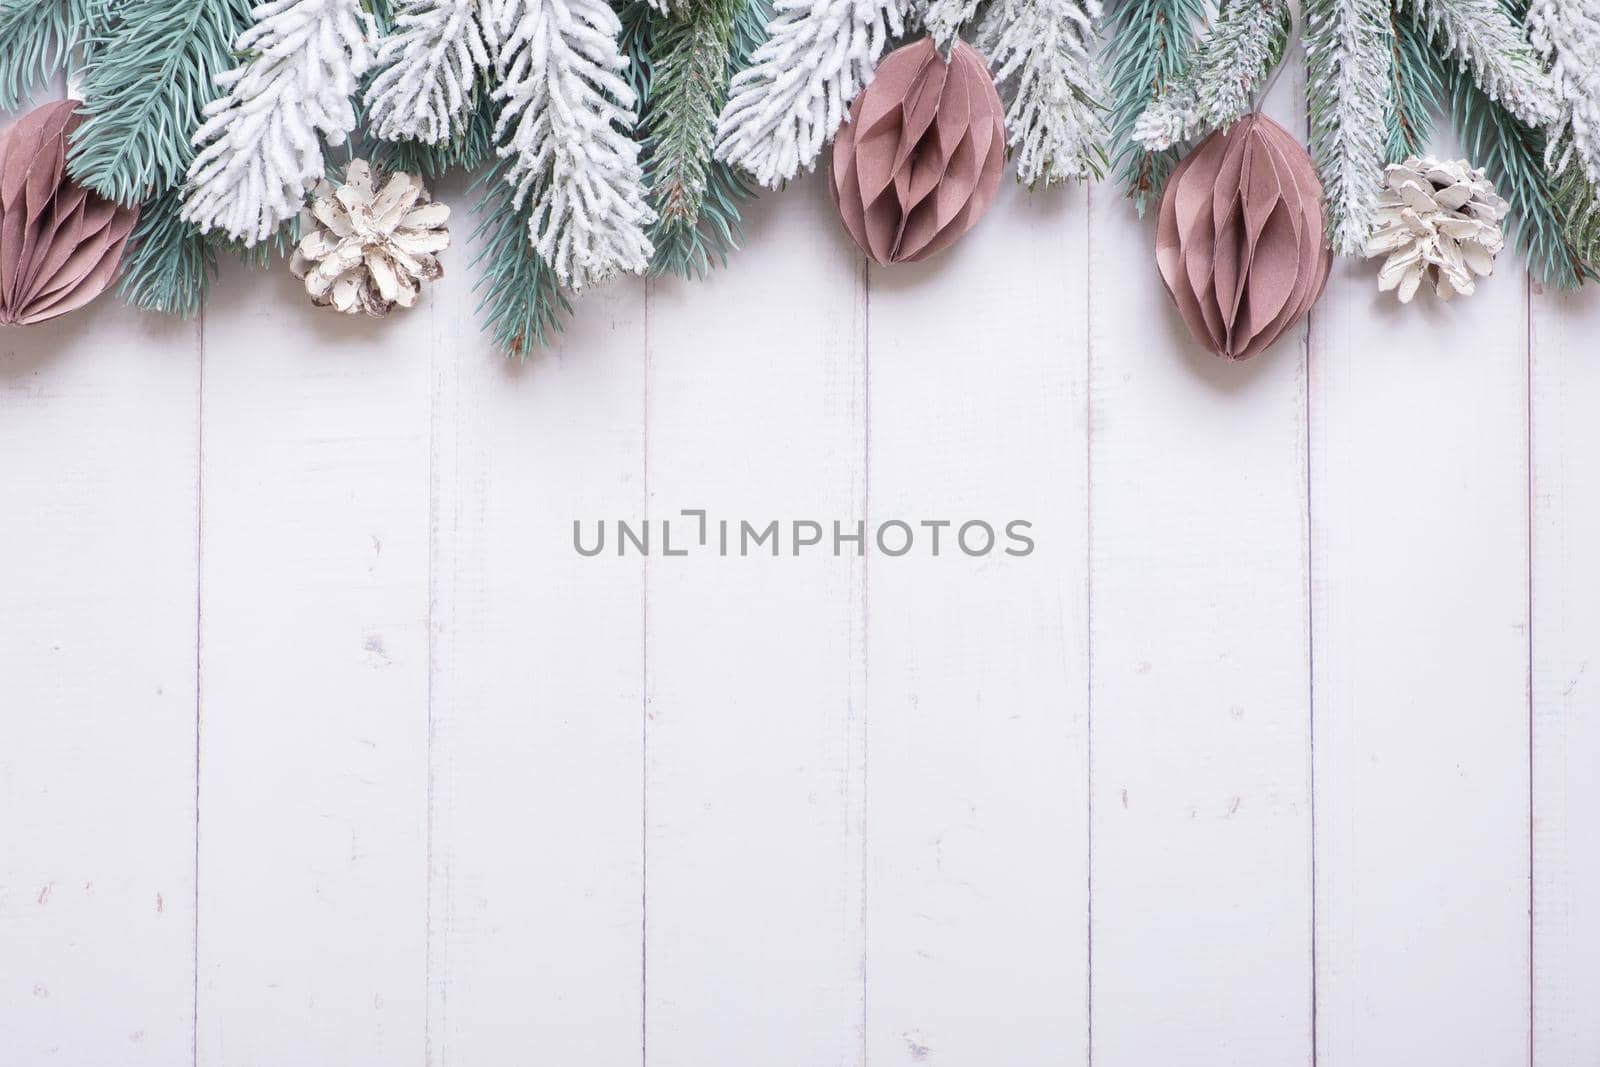 Christmas background with flat lay snow pine trees, paper Christmas toys on wooden background. High quality photo